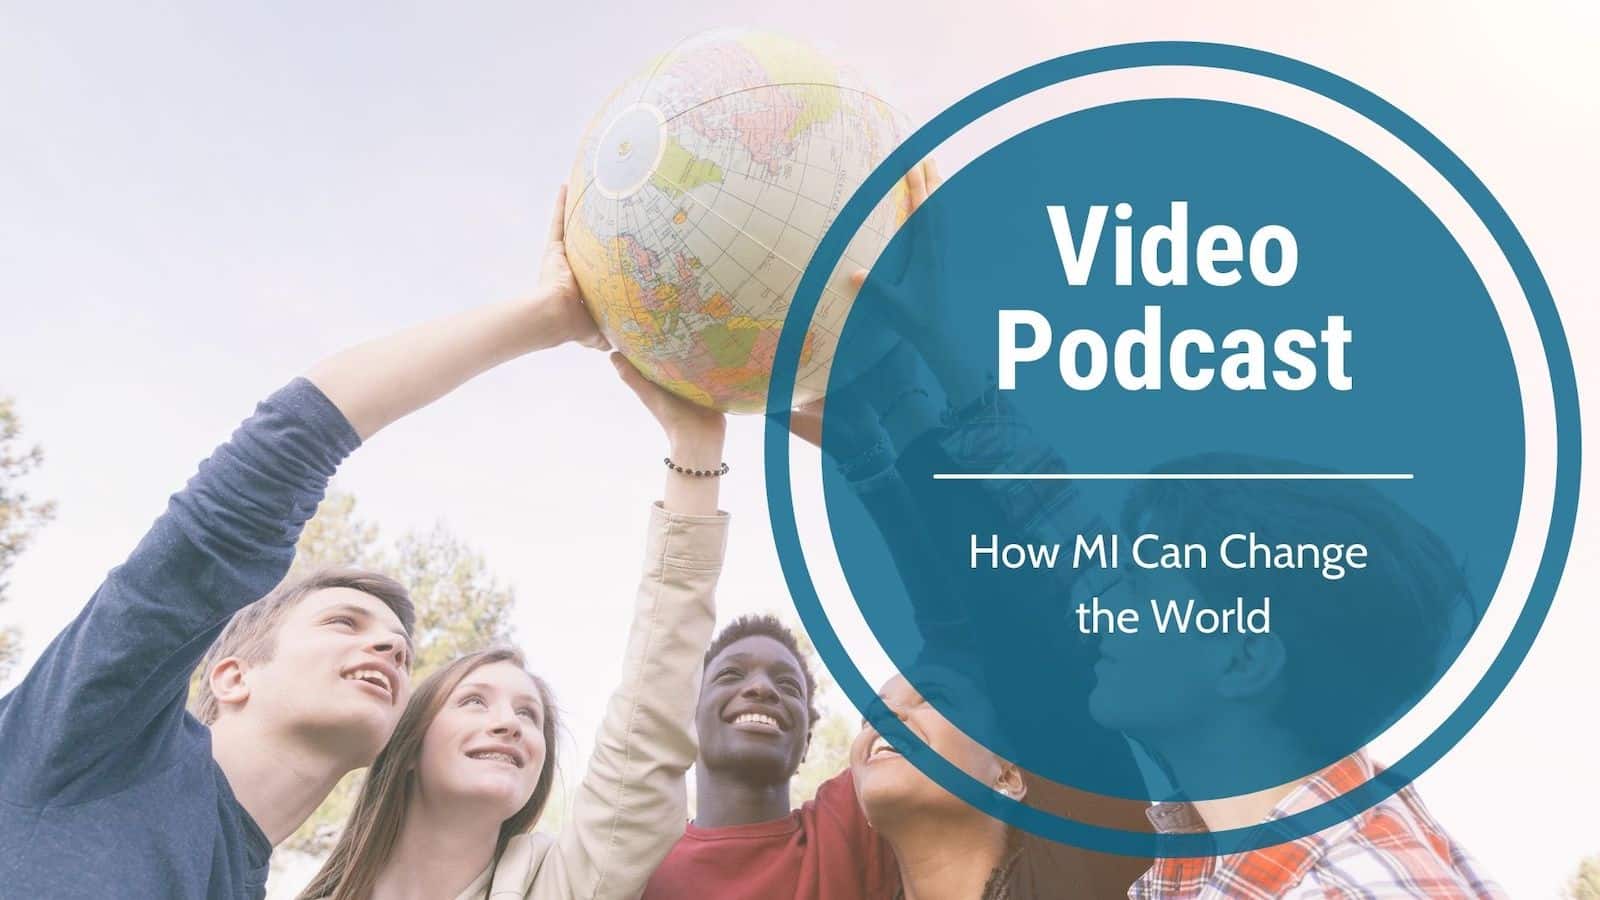 Video Podcast-How can MI change the world?